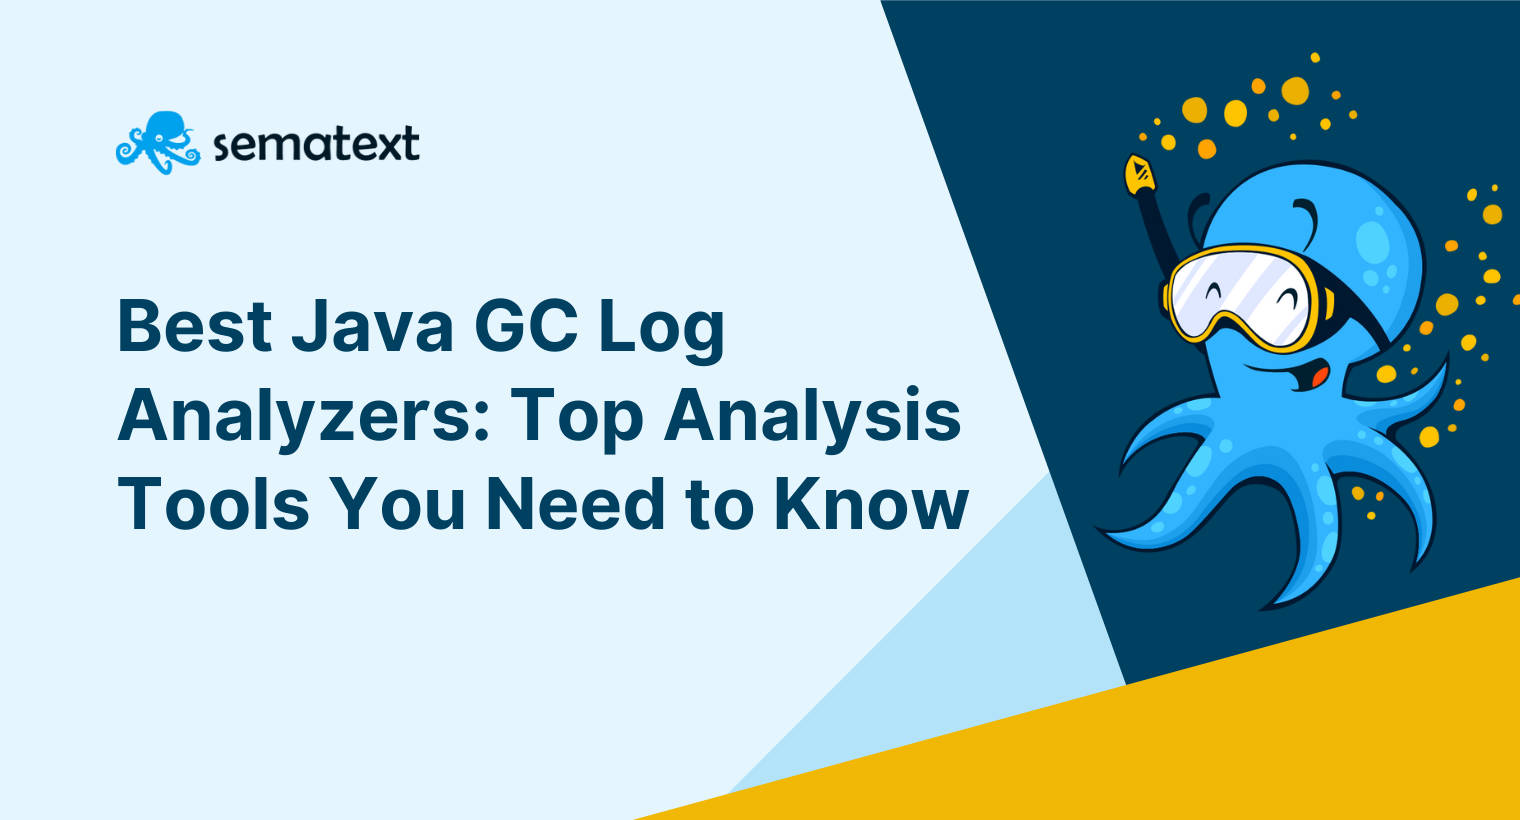 Best Java GC Log Analyzers: Top Analysis Tools You Need to Know in 2022